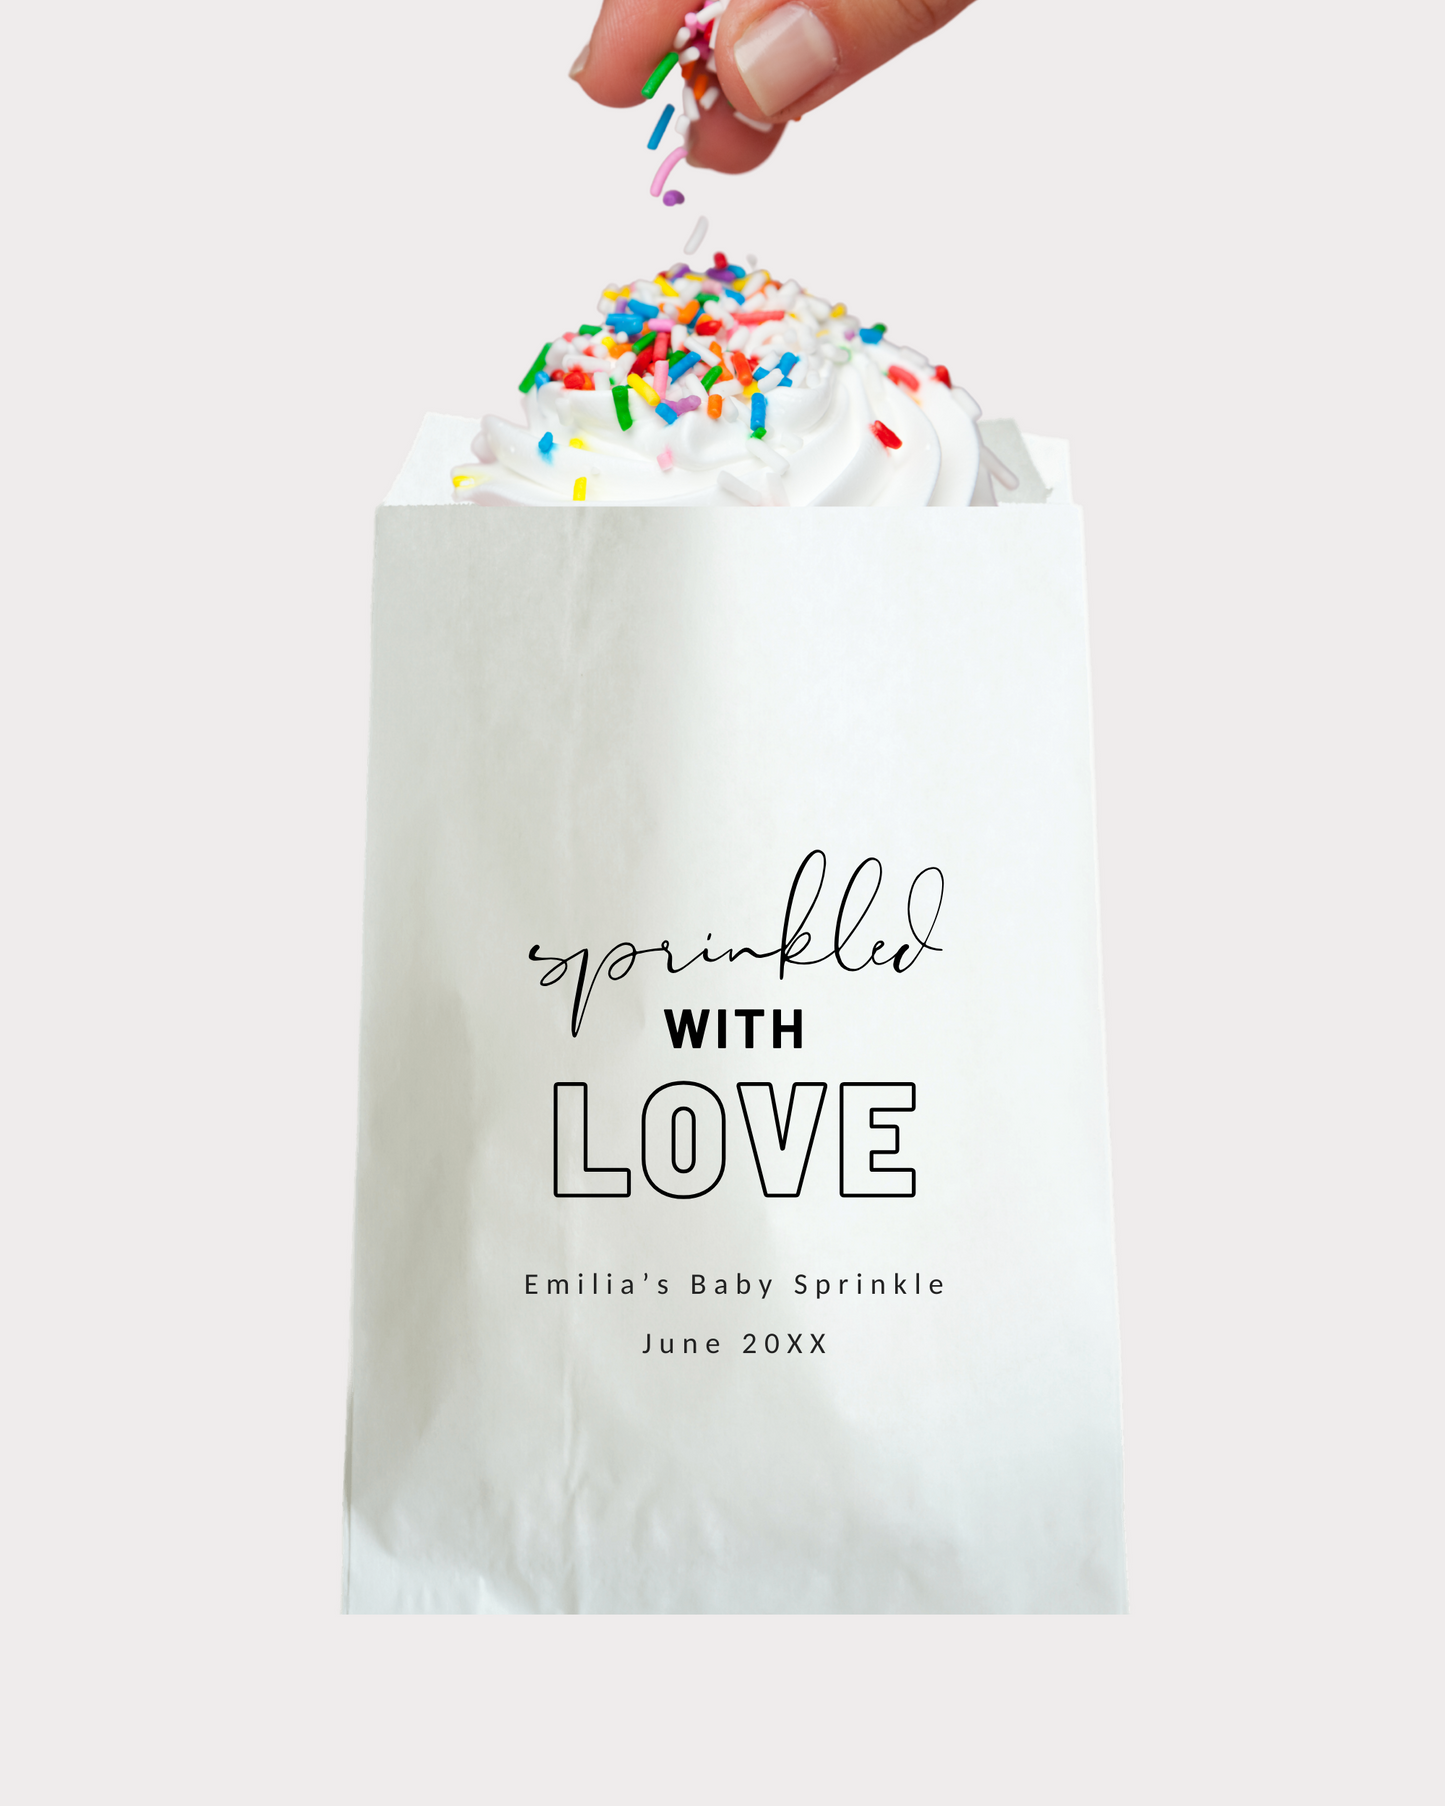 Personalized Sprinkled with Love party gift bags. Looking for baby shower treat bags with a one of a kind design where your guests will appreciate the sweet reminder? We've got exactly what you're looking for! These white party bags are grease-resistant, durable and food safe.